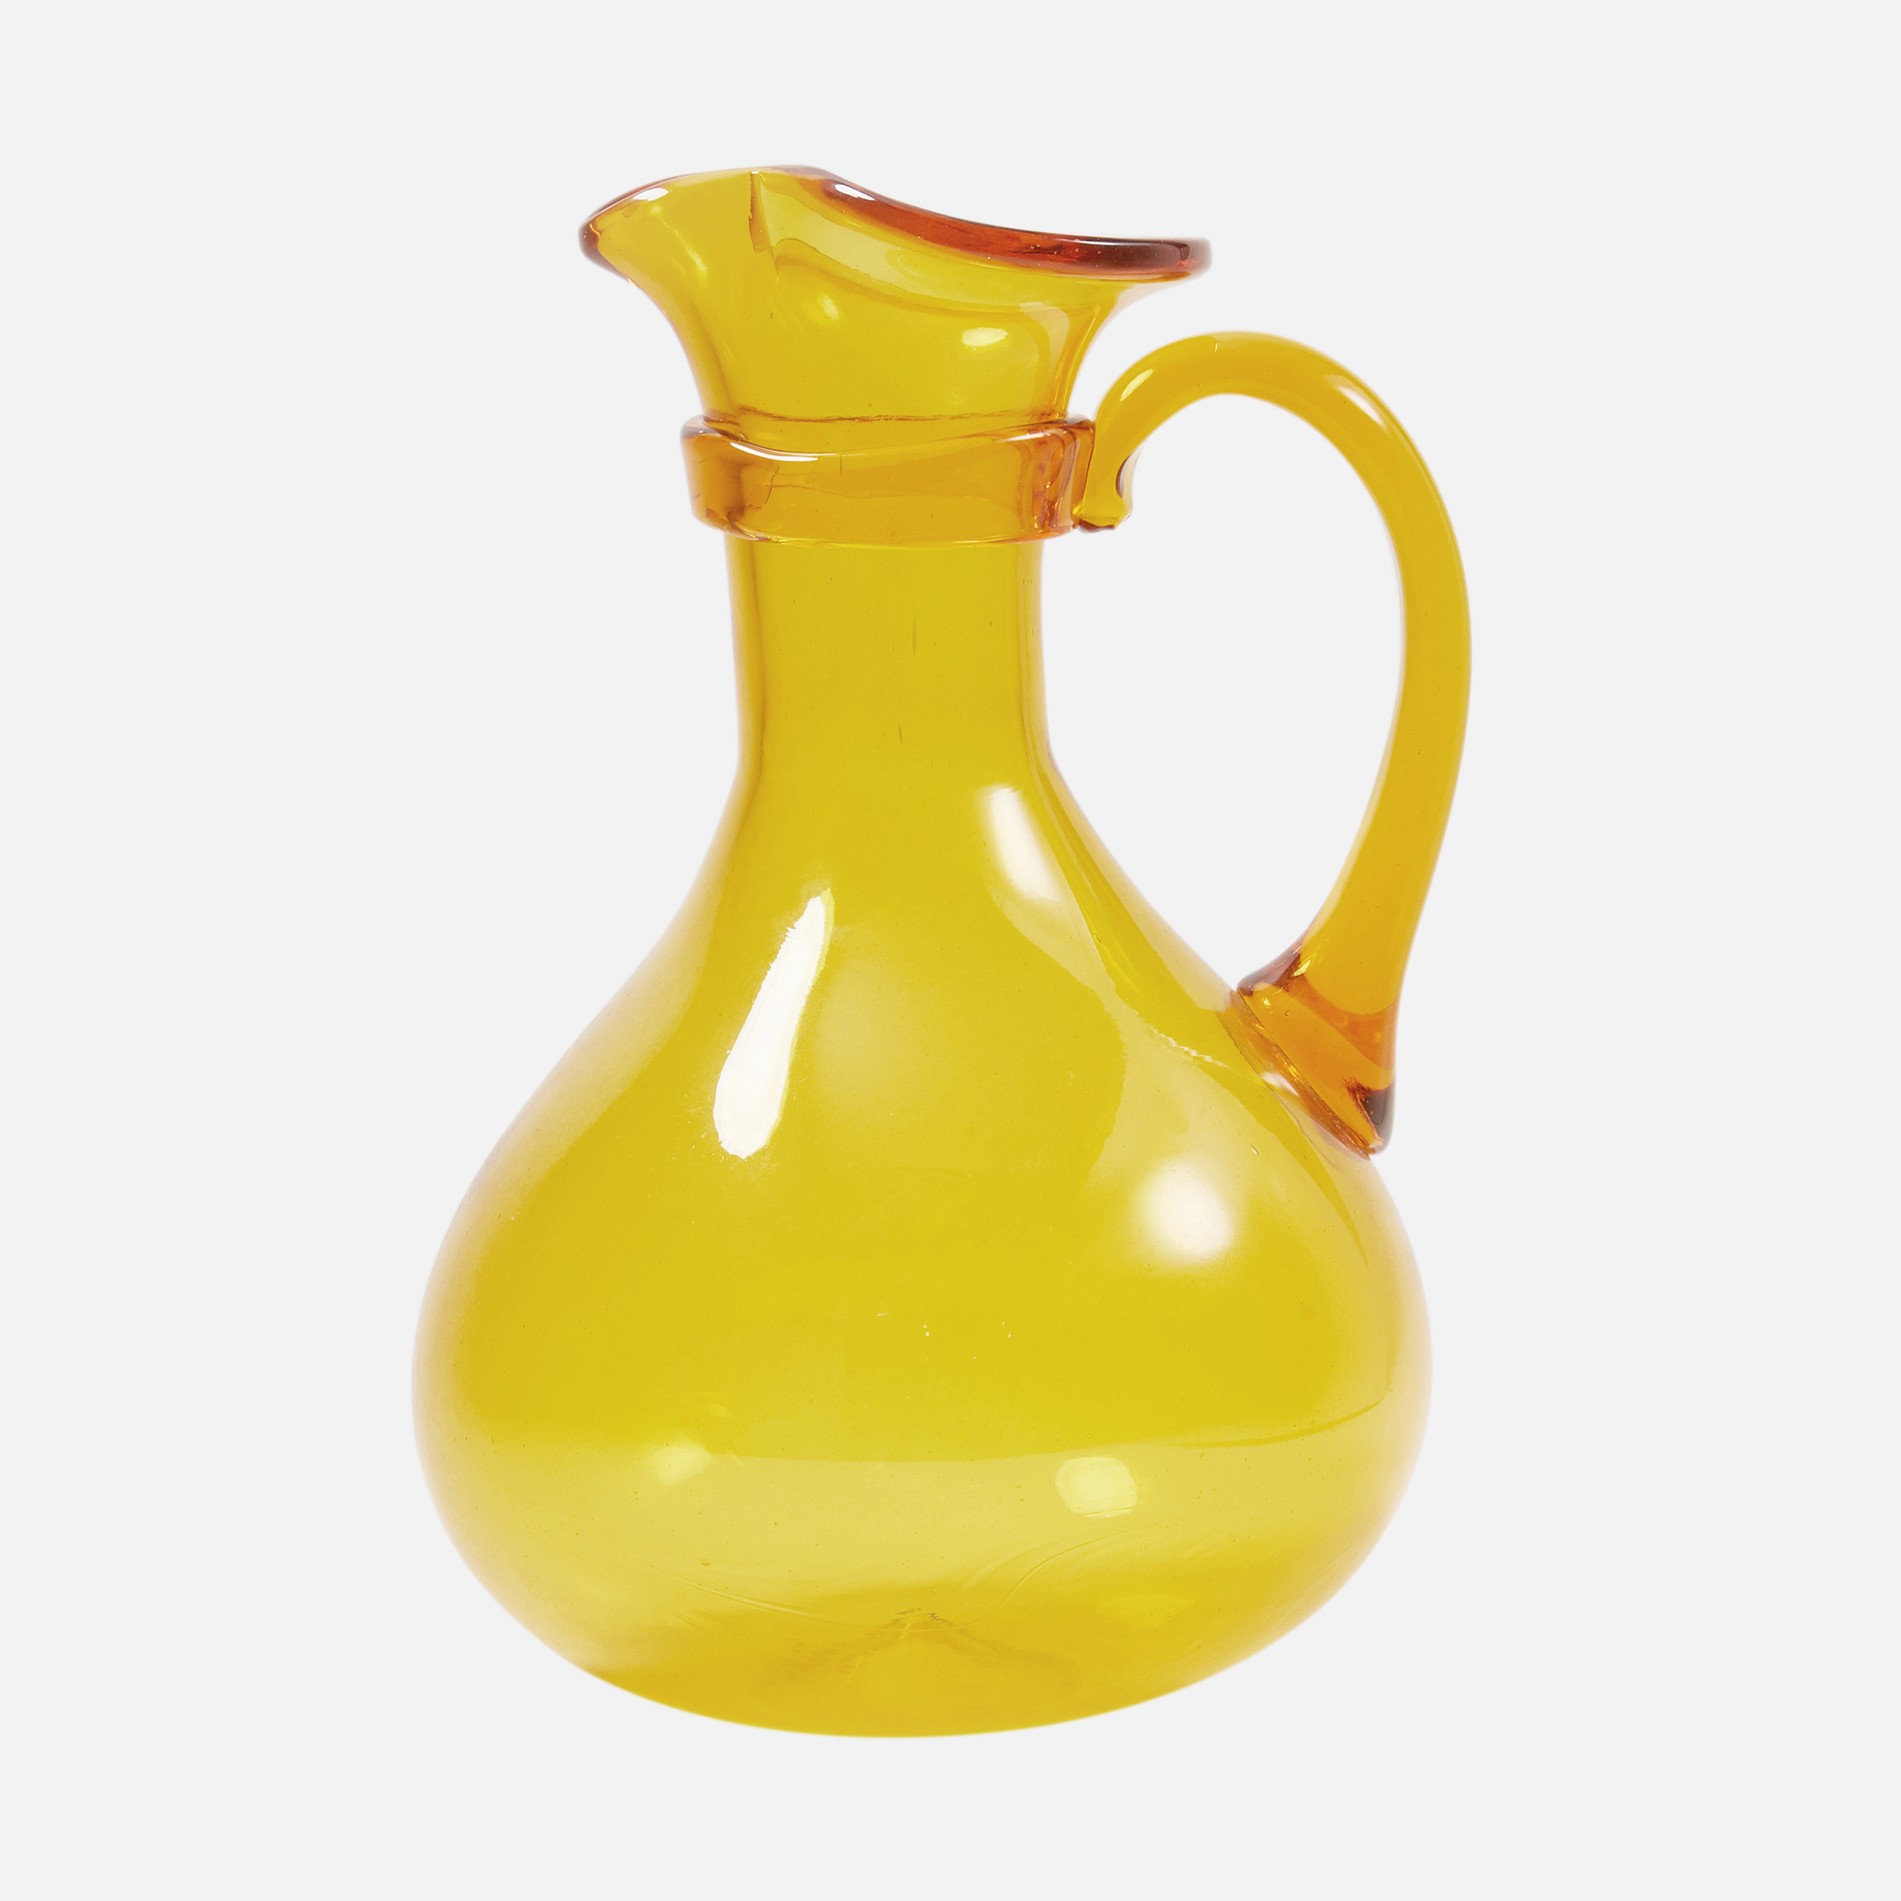 a yellow glass pitcher is shown against a white background